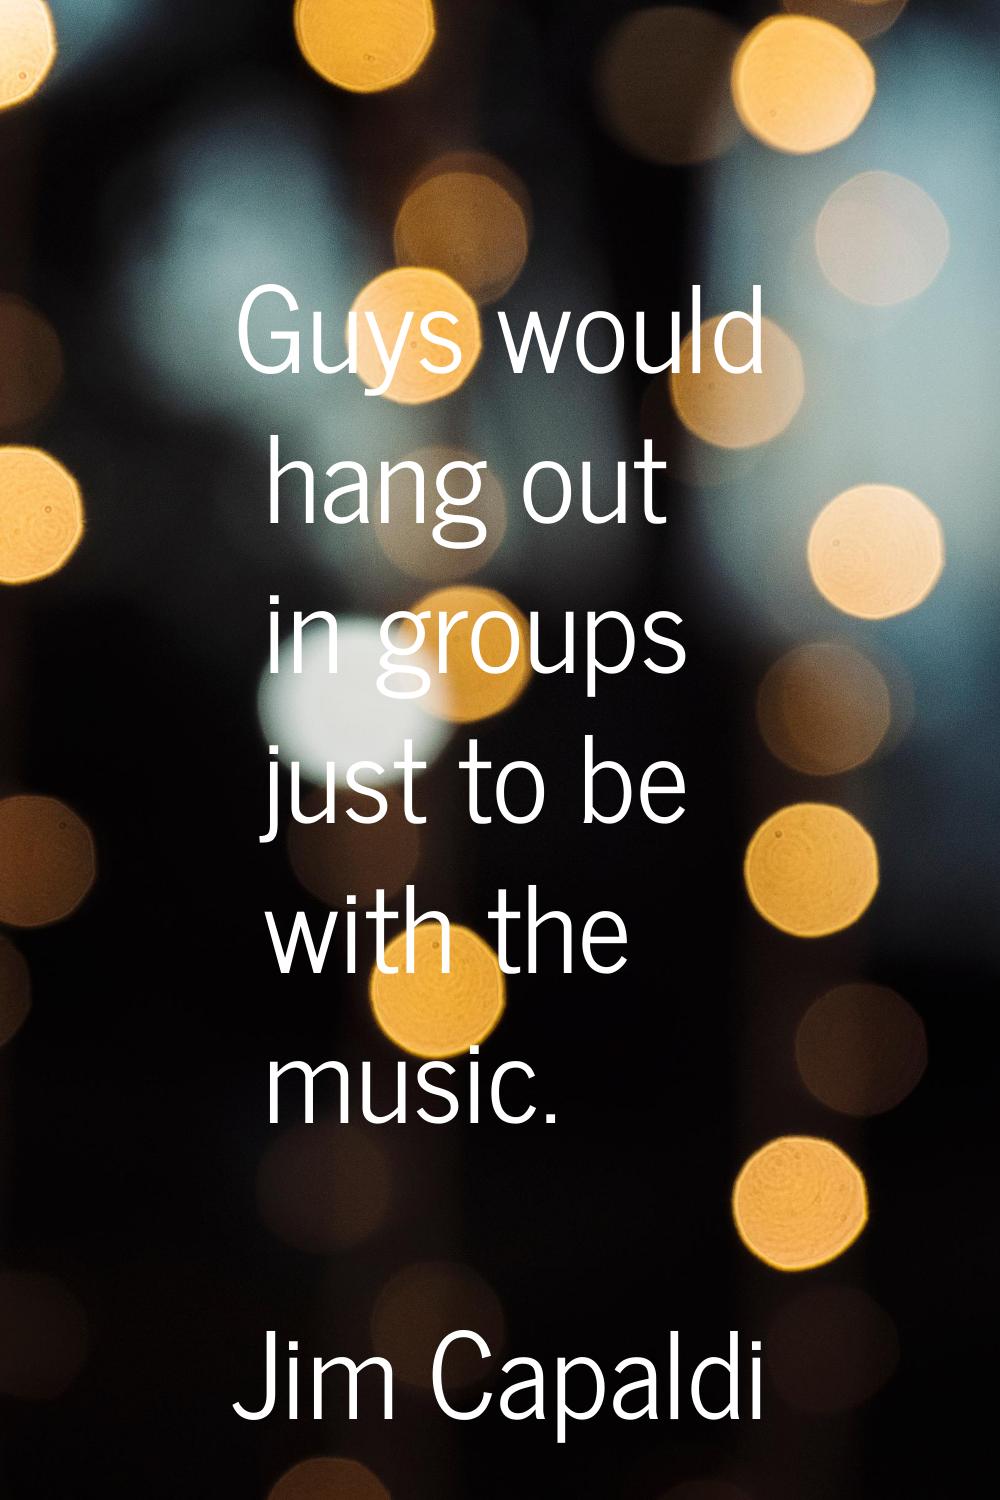 Guys would hang out in groups just to be with the music.